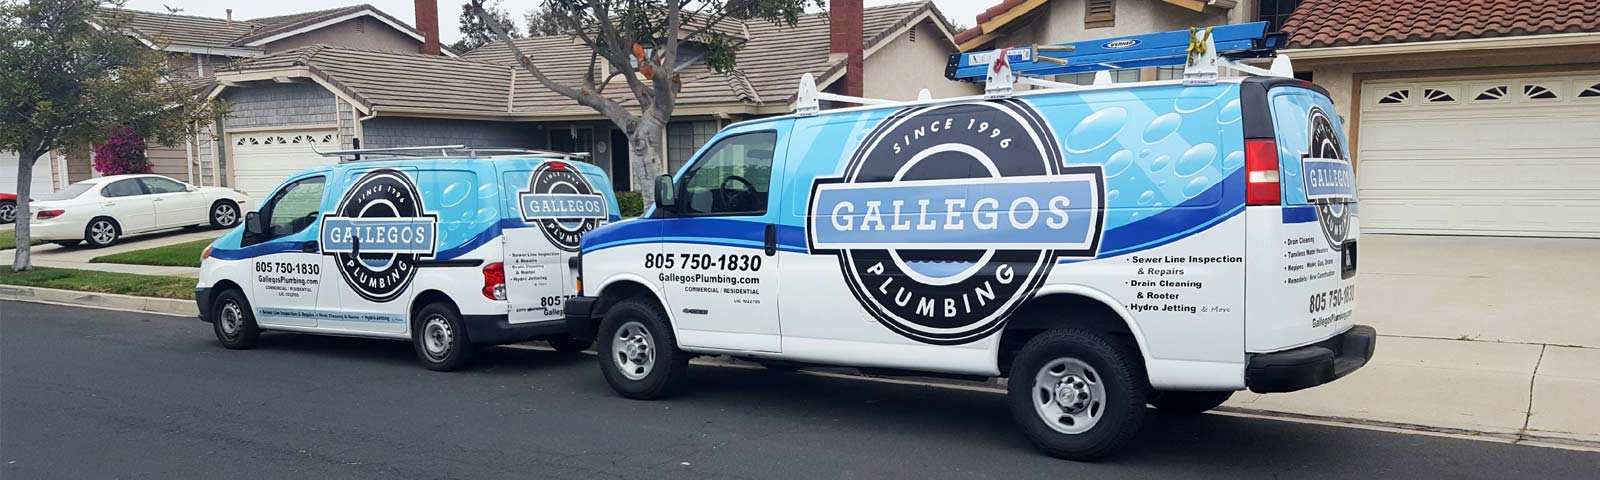 Plumbing Services, Drain Cleaning & Rooter Services in Ventura County